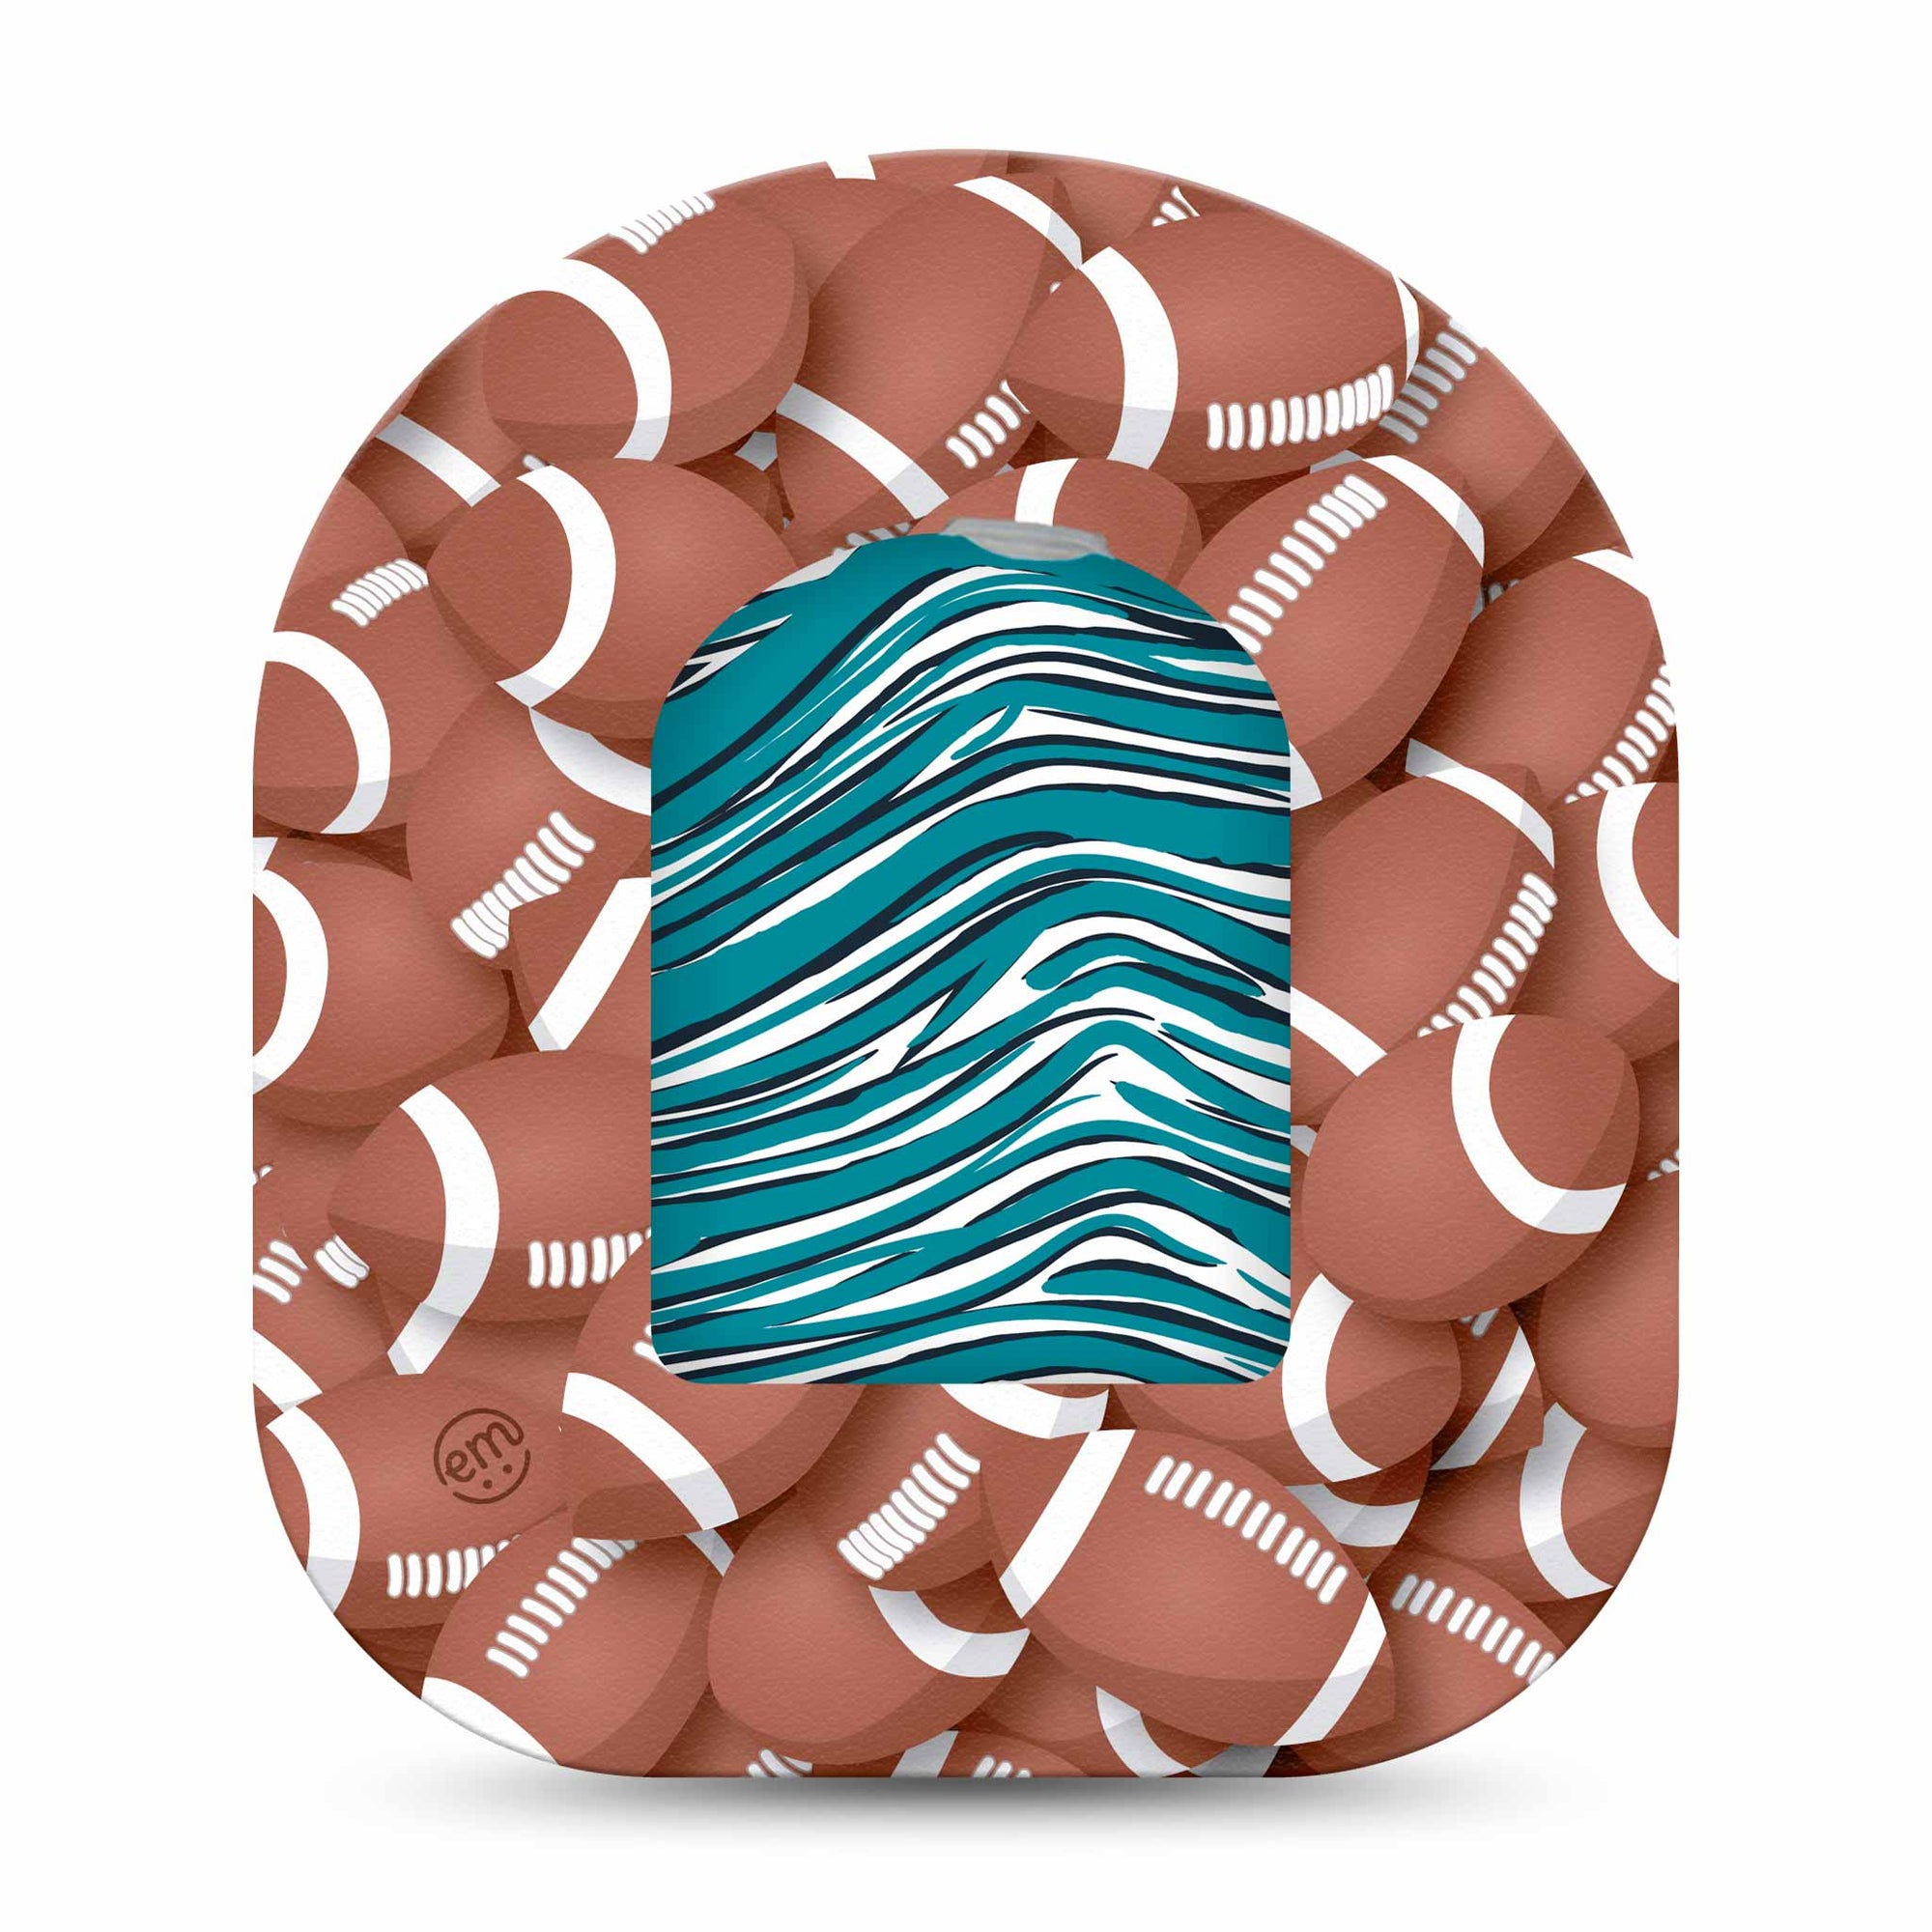 Teal and Black Jaguars Team Spirit Omnipod Sticker and Football Patch